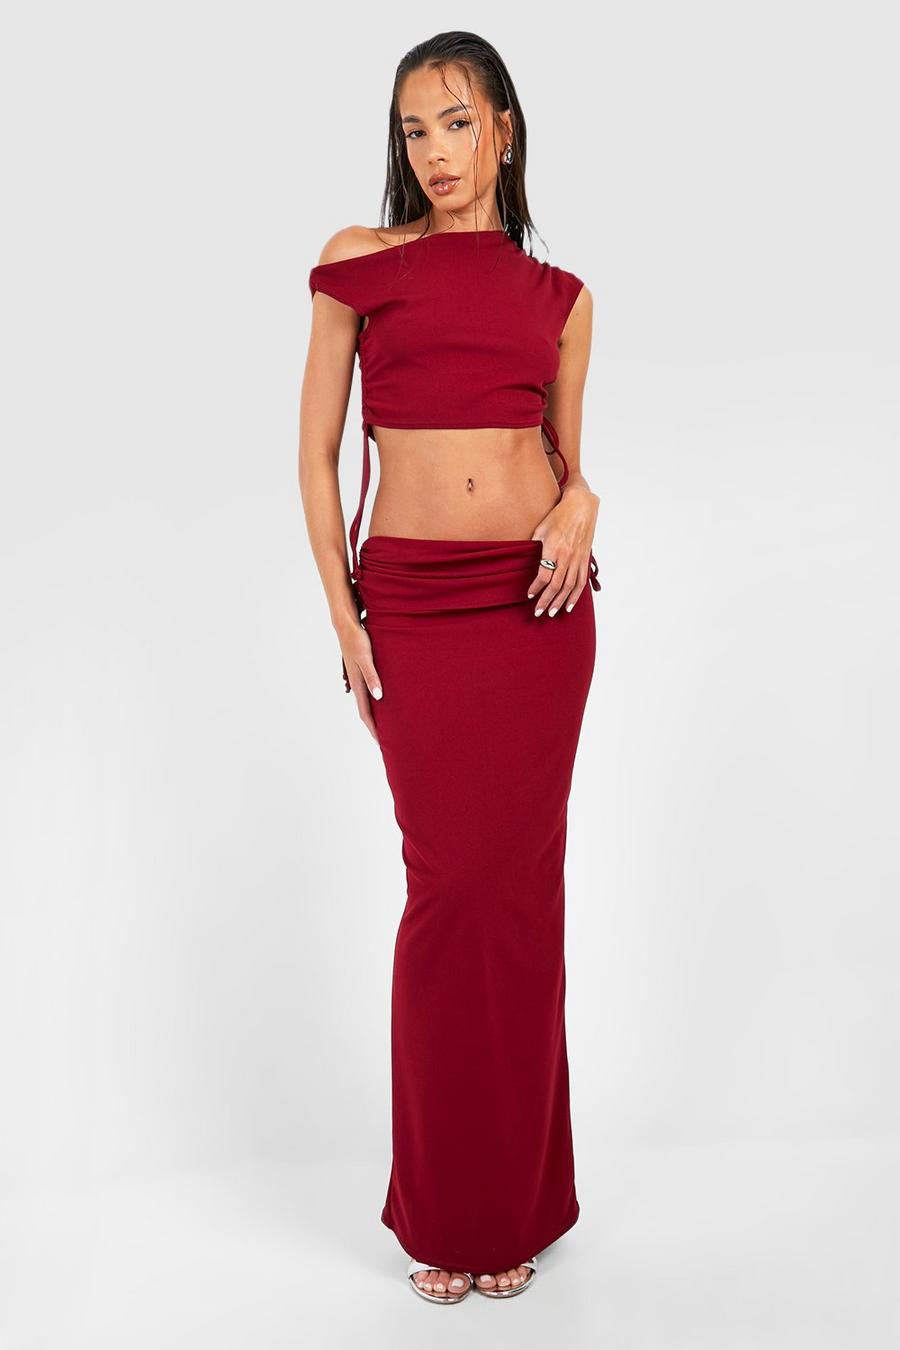 Cherry red Ruched Drape Shoulder Crop & Maxi Skirt